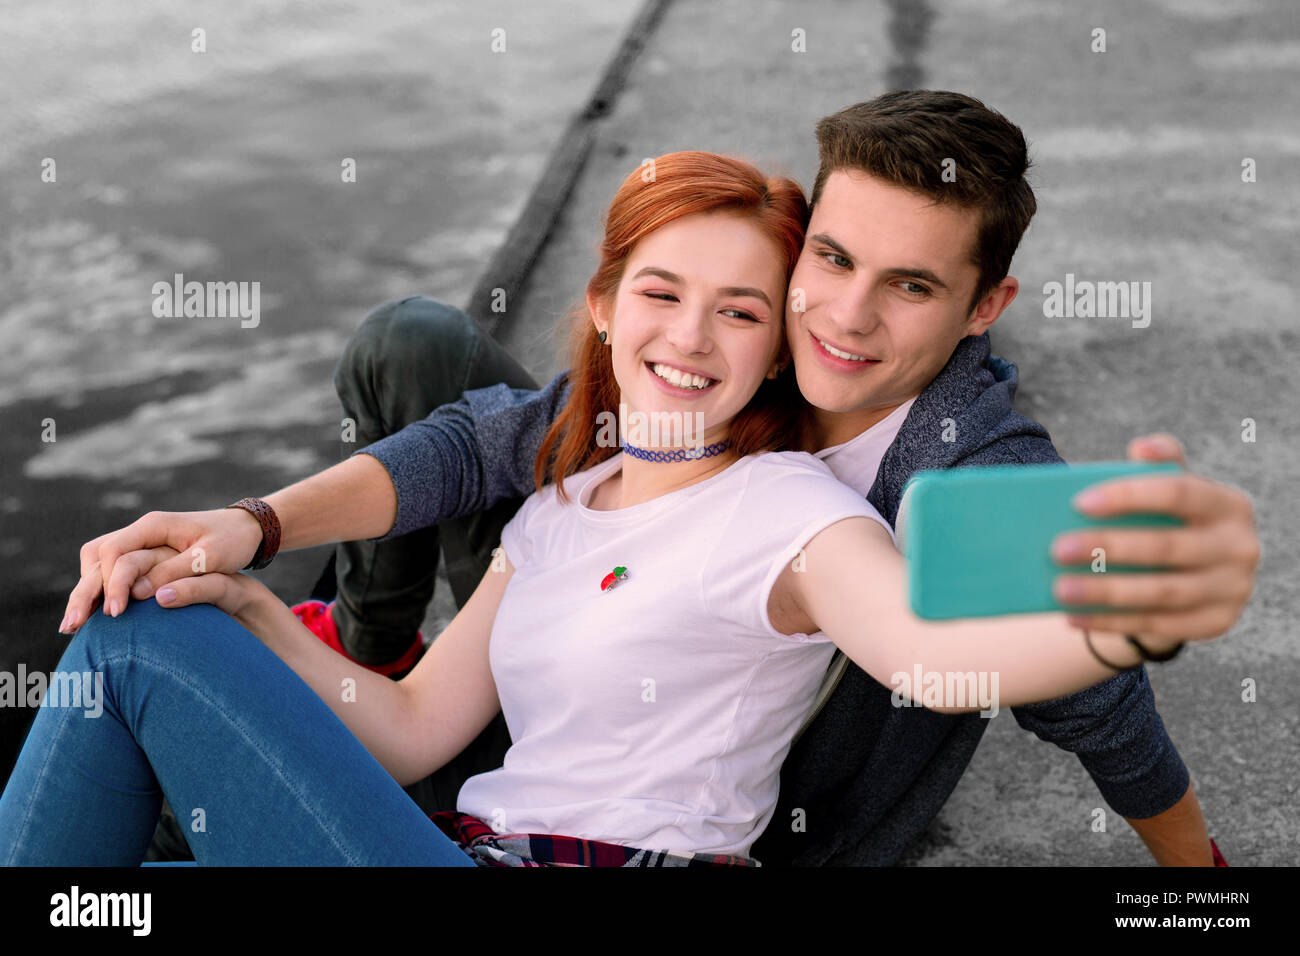 Excited Happy Real Life Natural Image Cute Cool Attractive Couple Stock  Photo by ©derepente 187532014